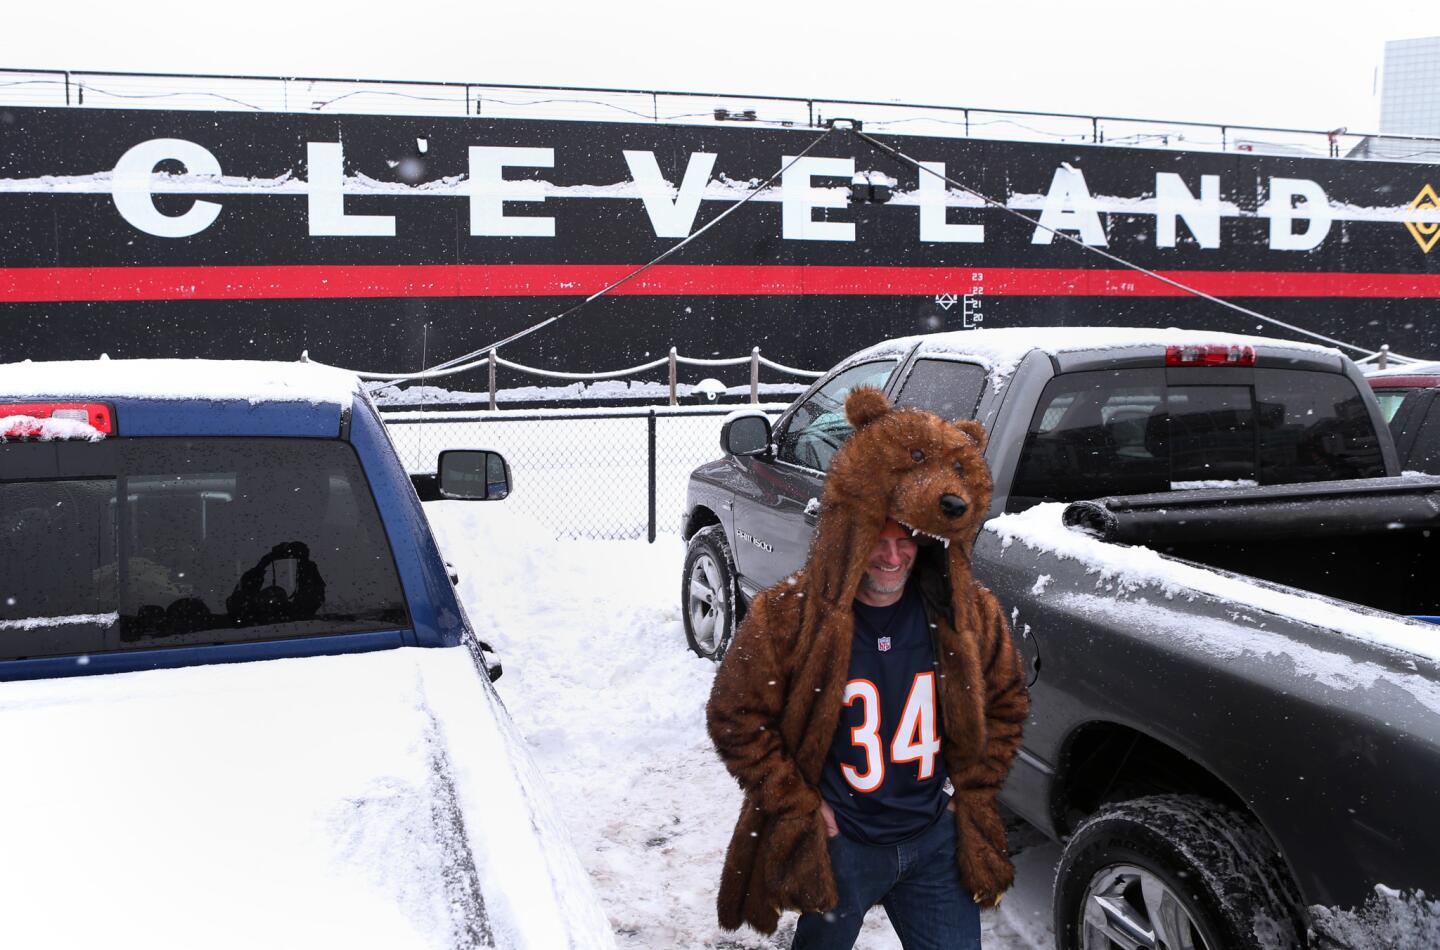 A Bear in Cleveland